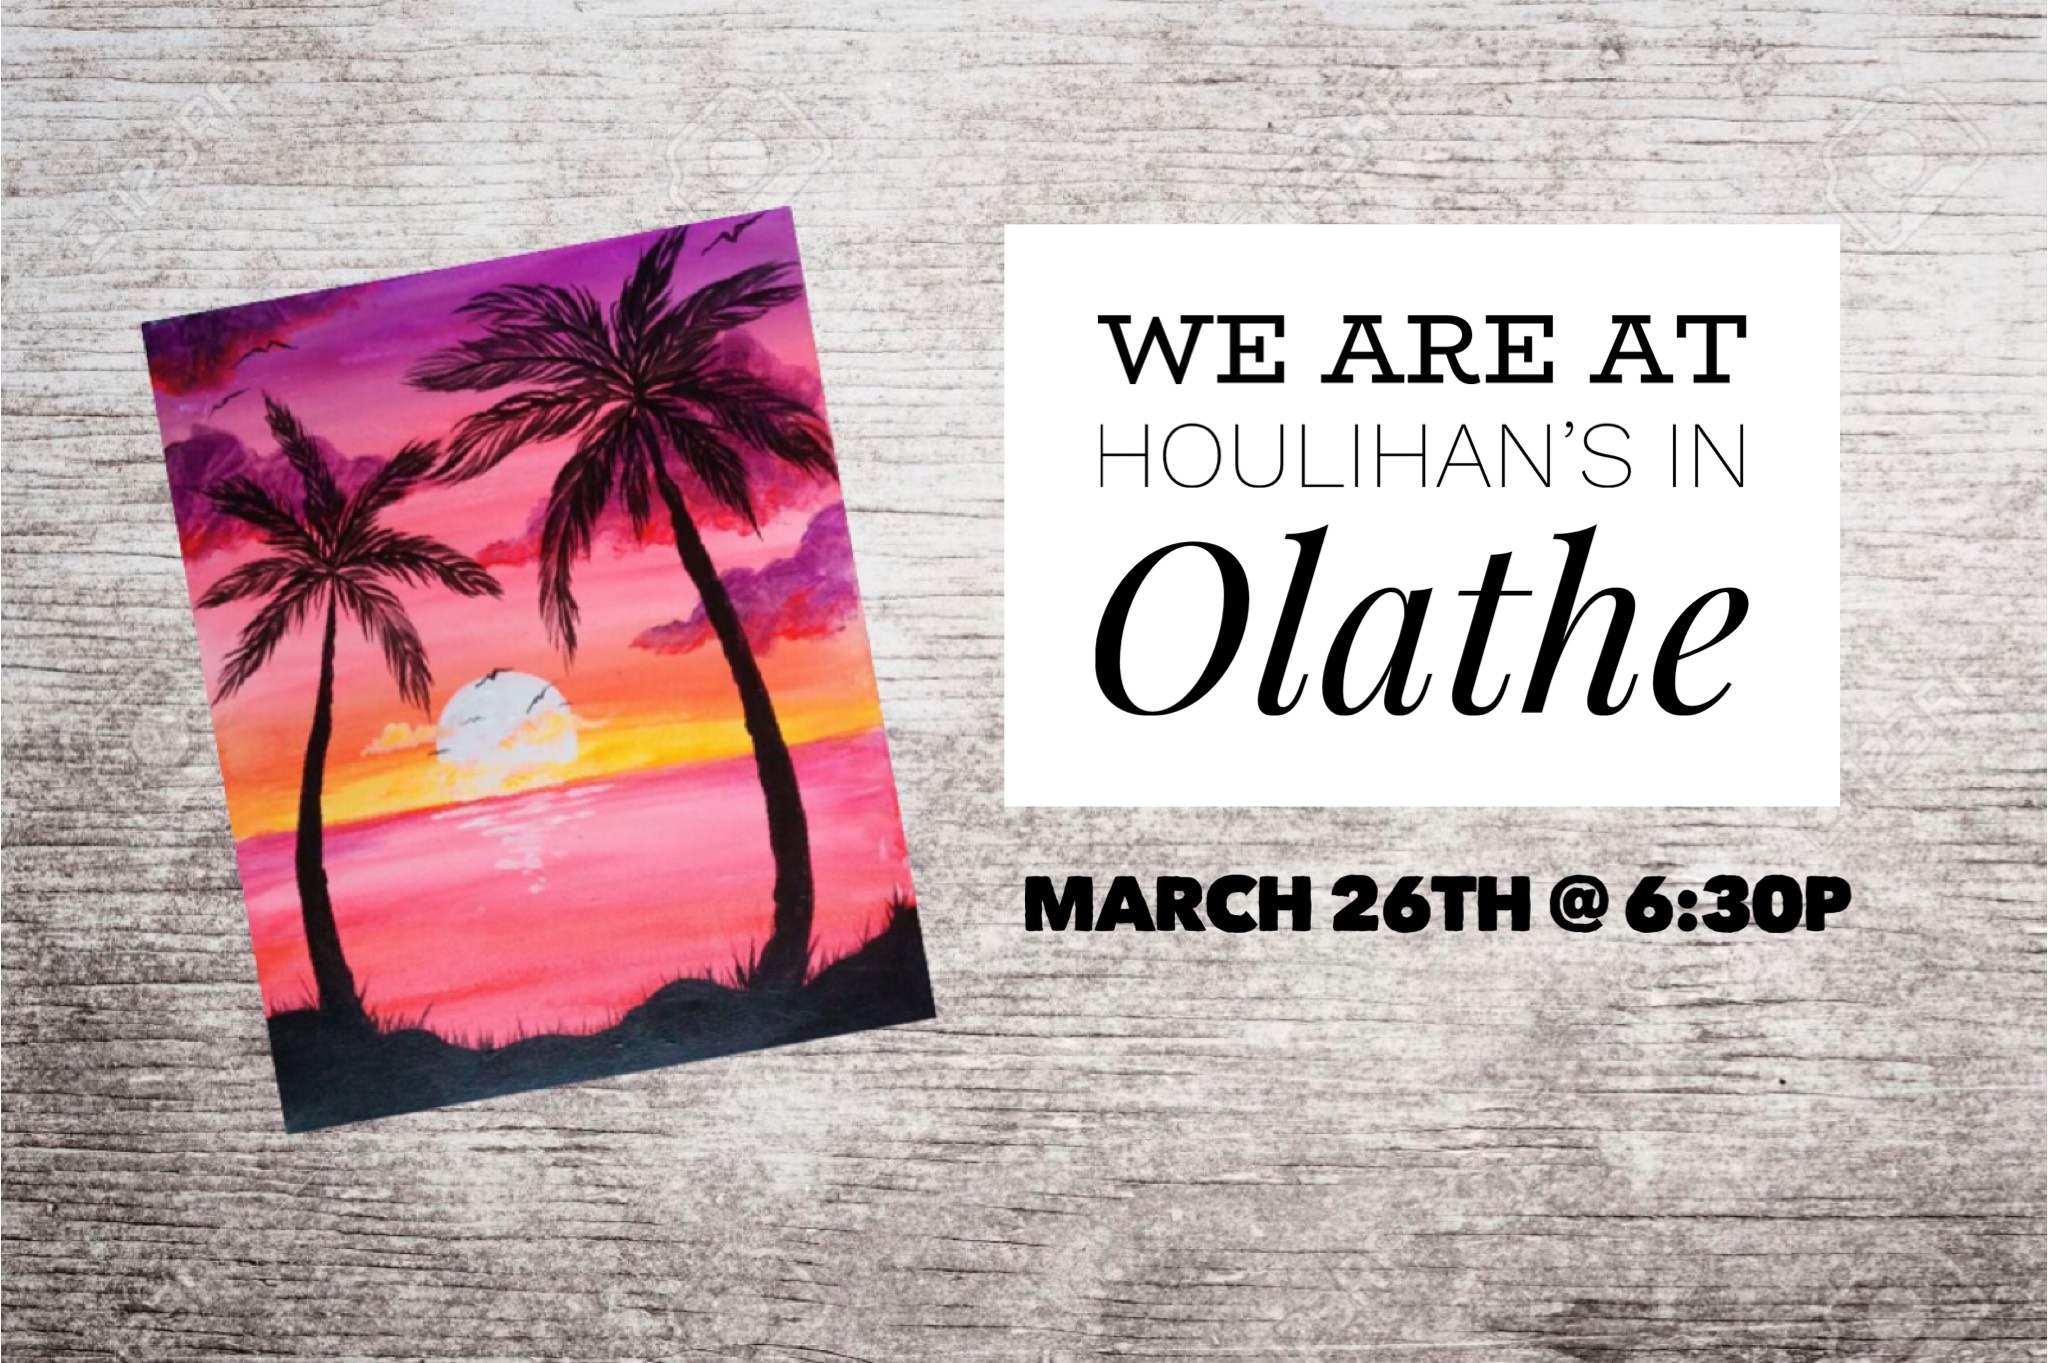 Olathe to Partner with Houlihan's 